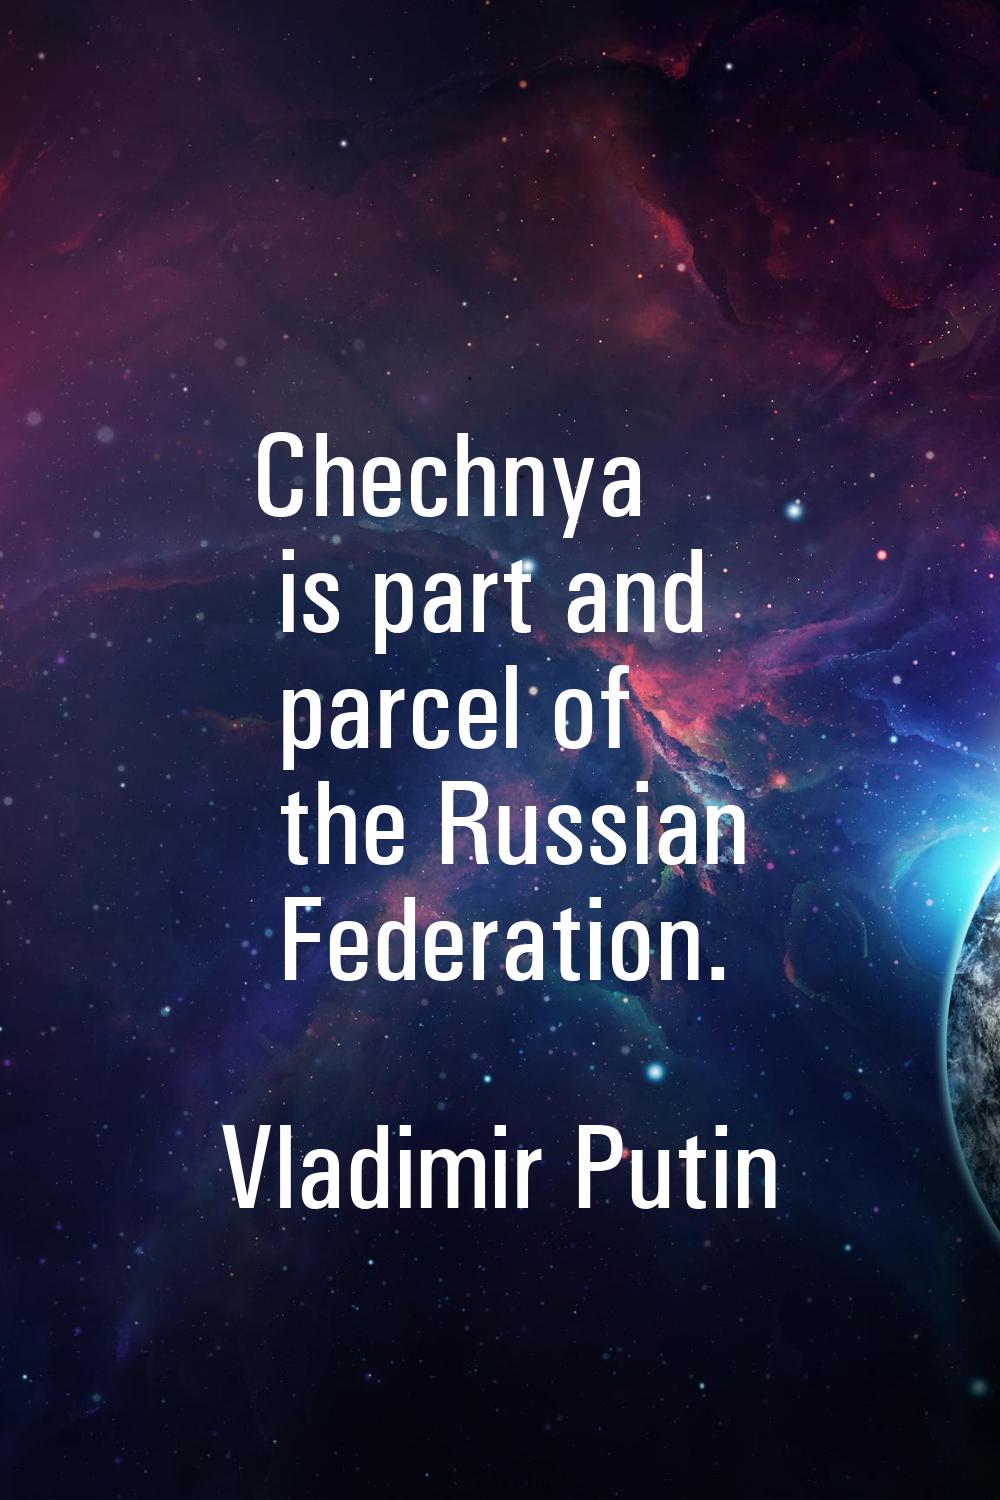 Chechnya is part and parcel of the Russian Federation.